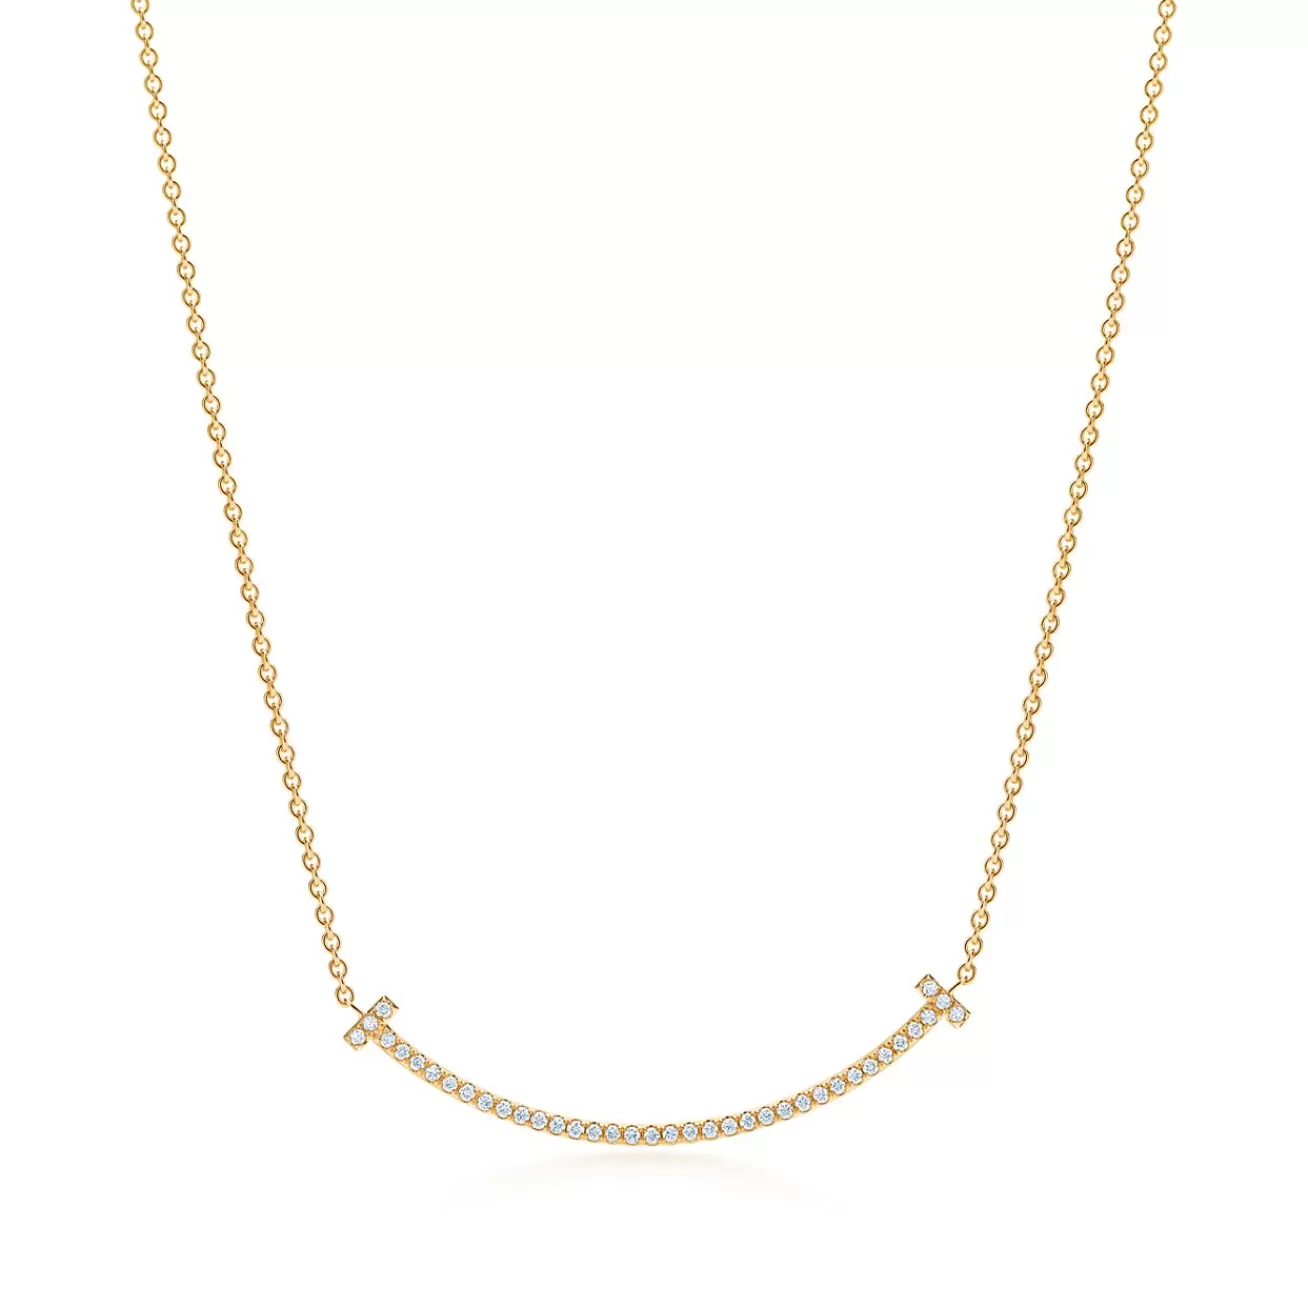 Tiffany & Co. Tiffany T Smile Pendant in Yellow Gold with Diamonds, Small | ^ Necklaces & Pendants | Gifts for Her